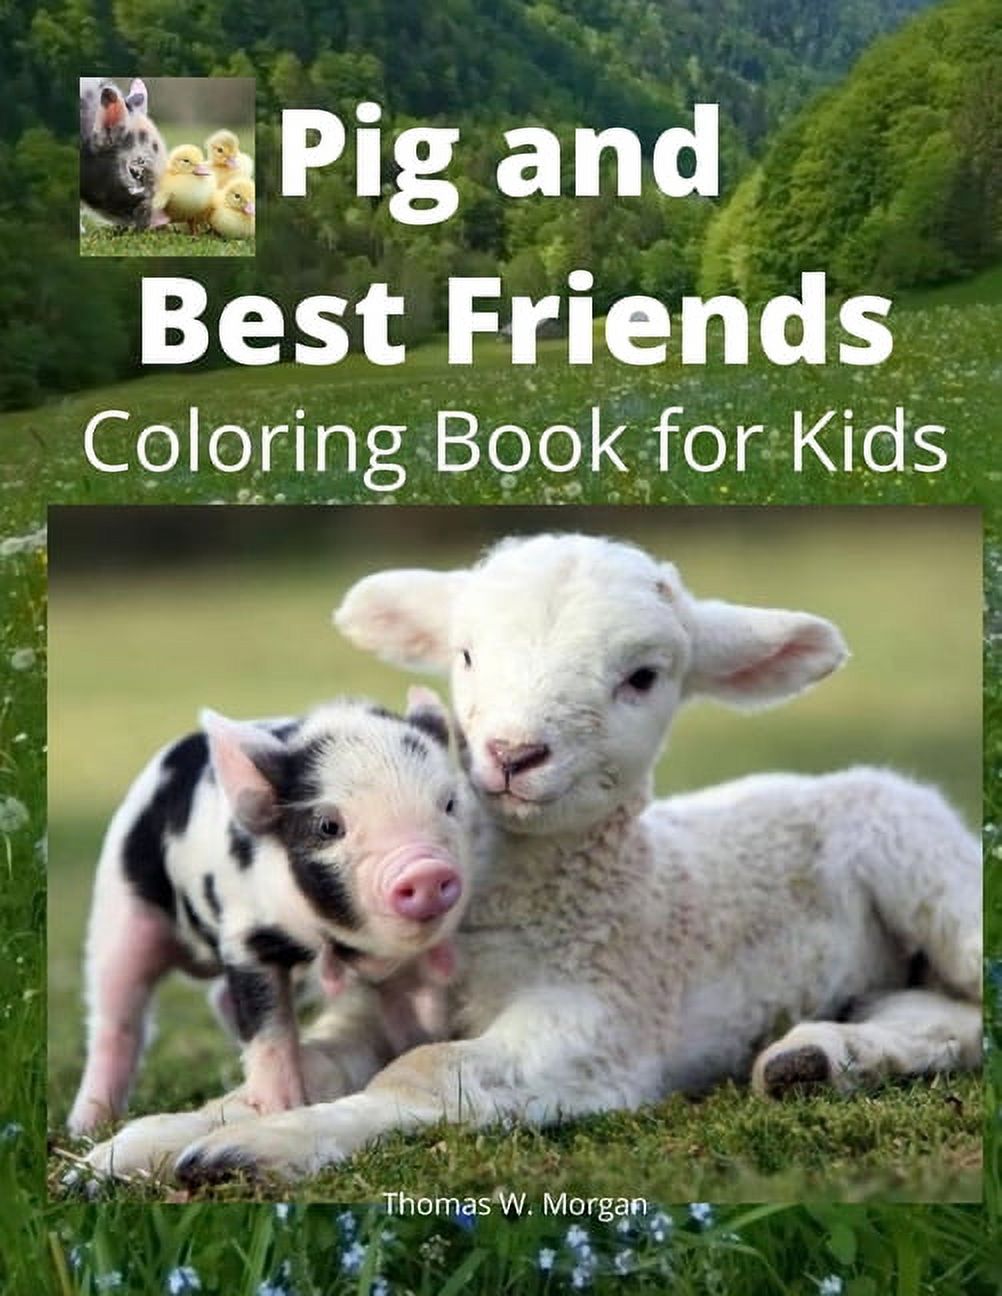 Pig and Best Friends Coloring Book for Kids : A Cute Farm Animal Coloring Book for Kids Ages 3-8 - Super Coloring Pages of Animals on the Farm - Pig and Best Friends Activity and Coloring Book for Boys, Girls and Kids - Amazing Gift for Kids (Paperback) - image 1 of 1